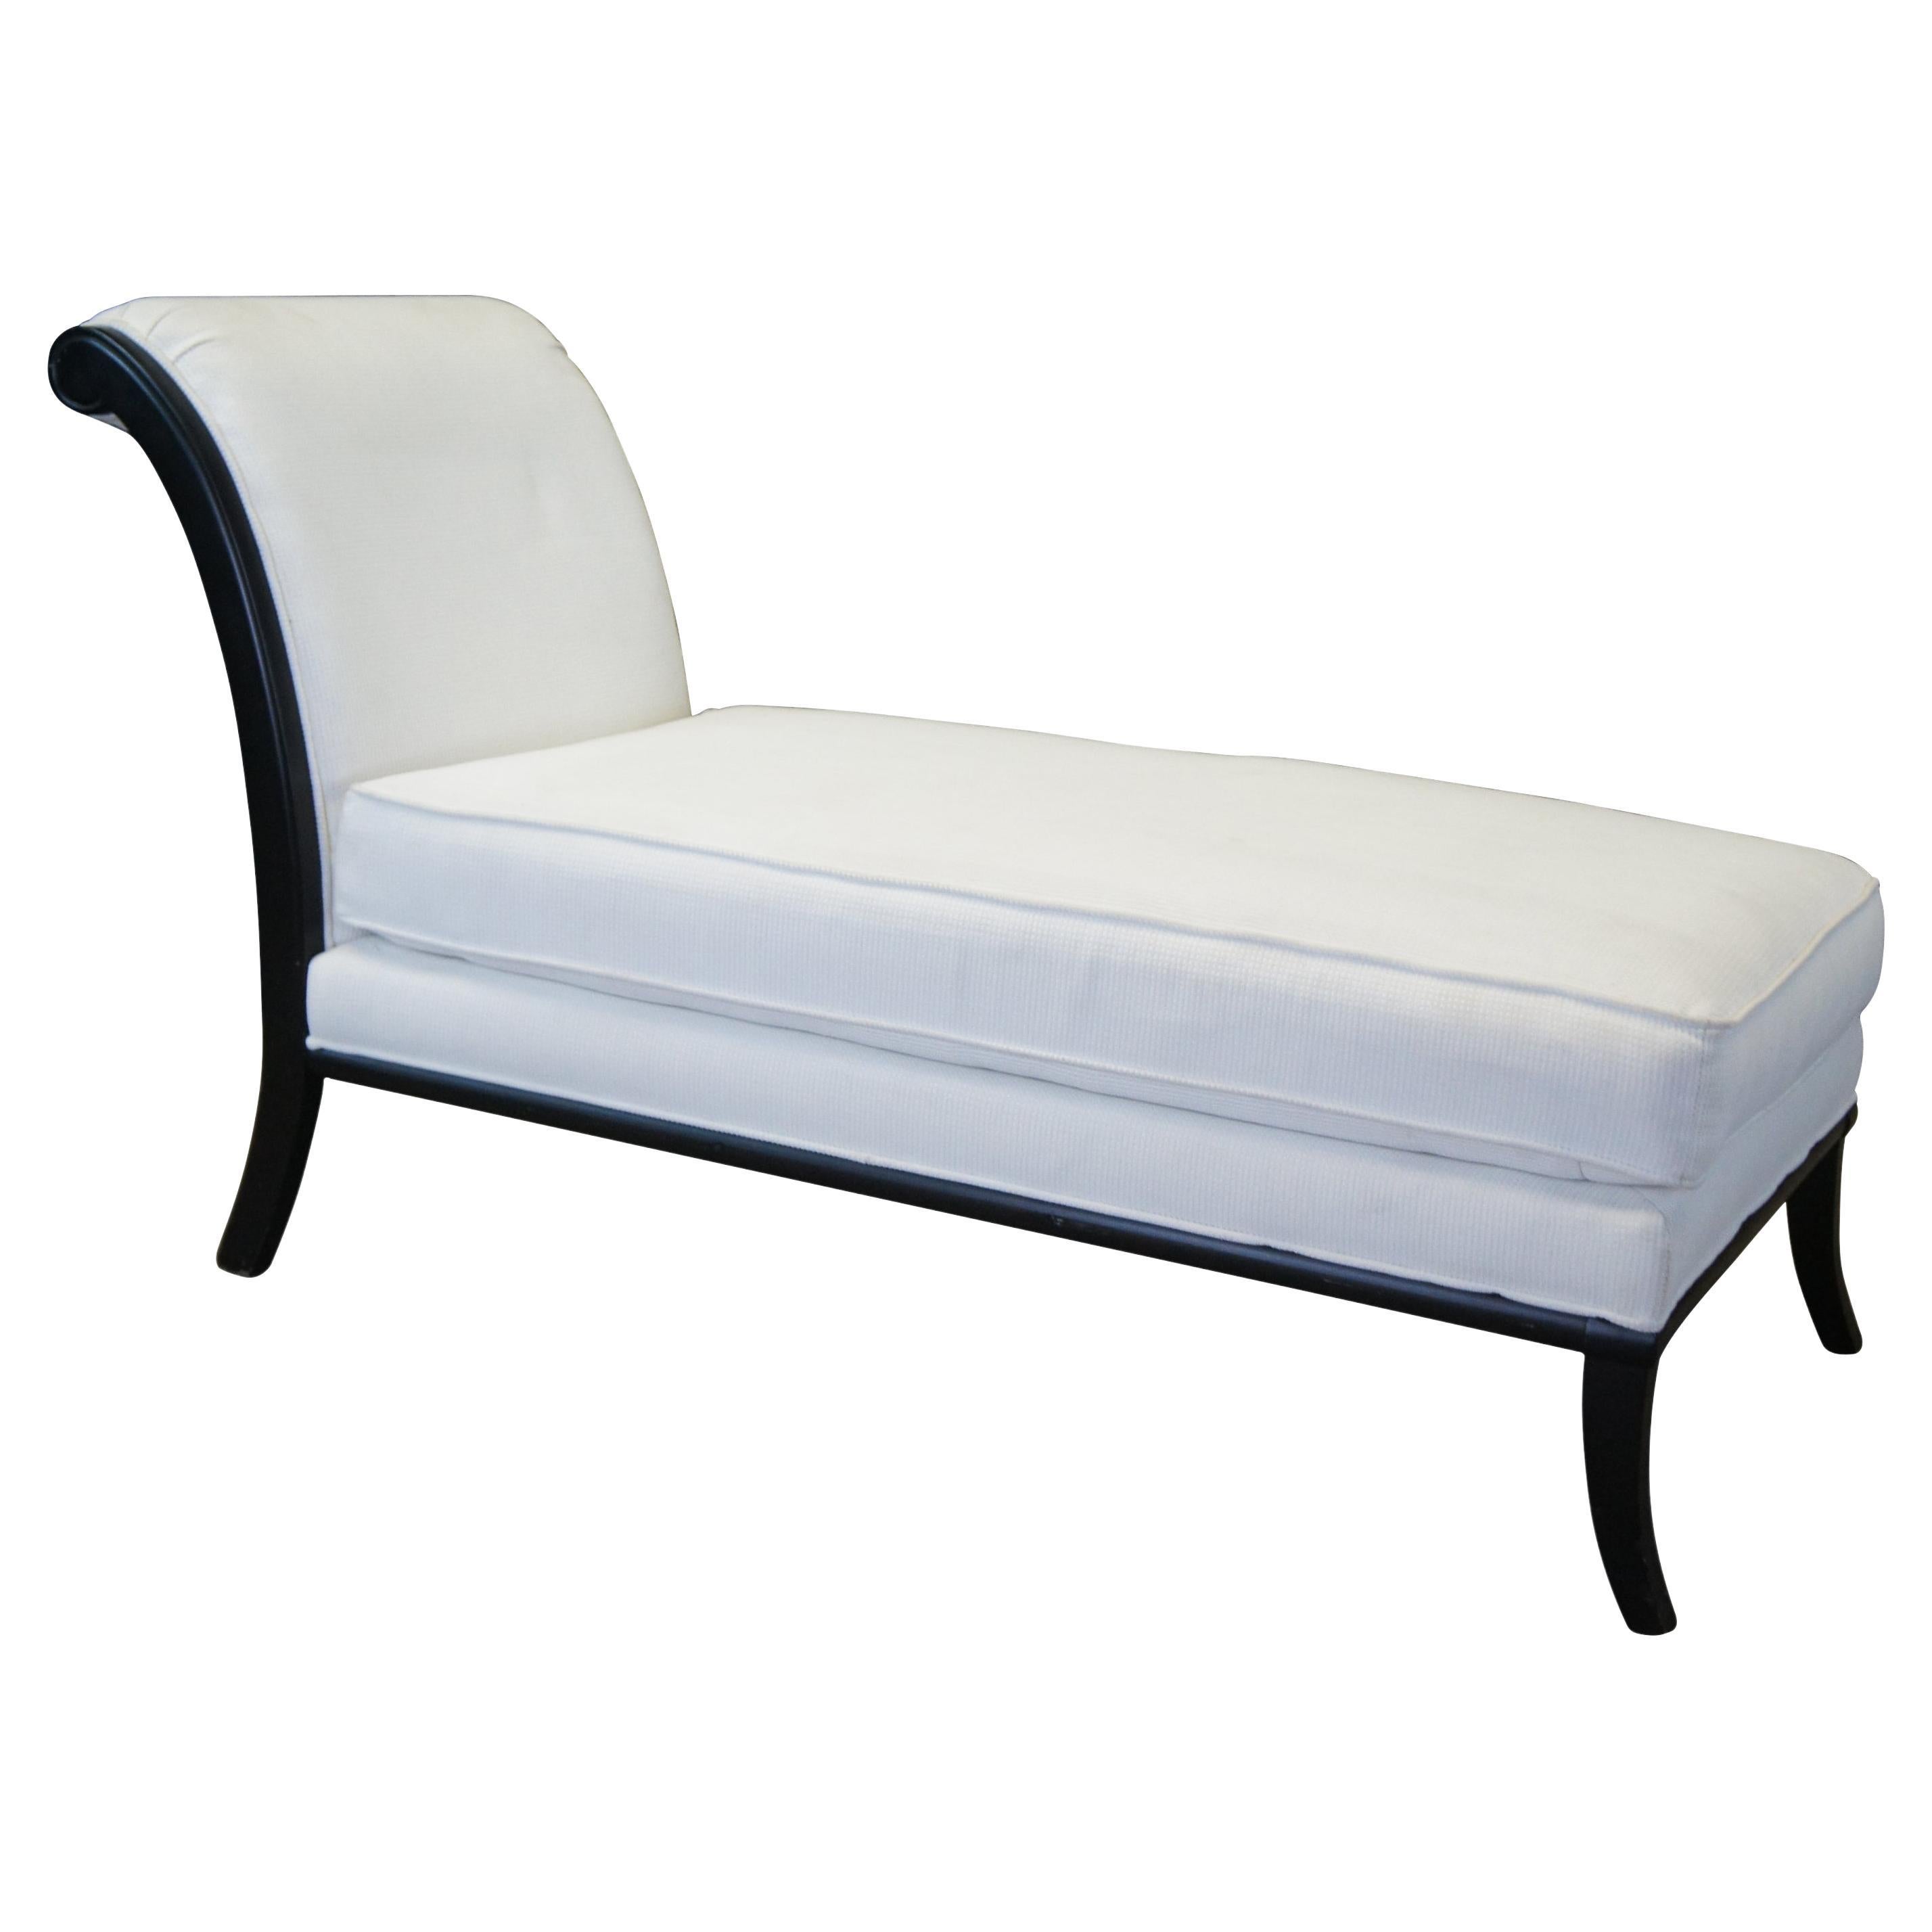 Vintage Fairfield White Upholstered Black Frame French Chaise Lounge For Sale